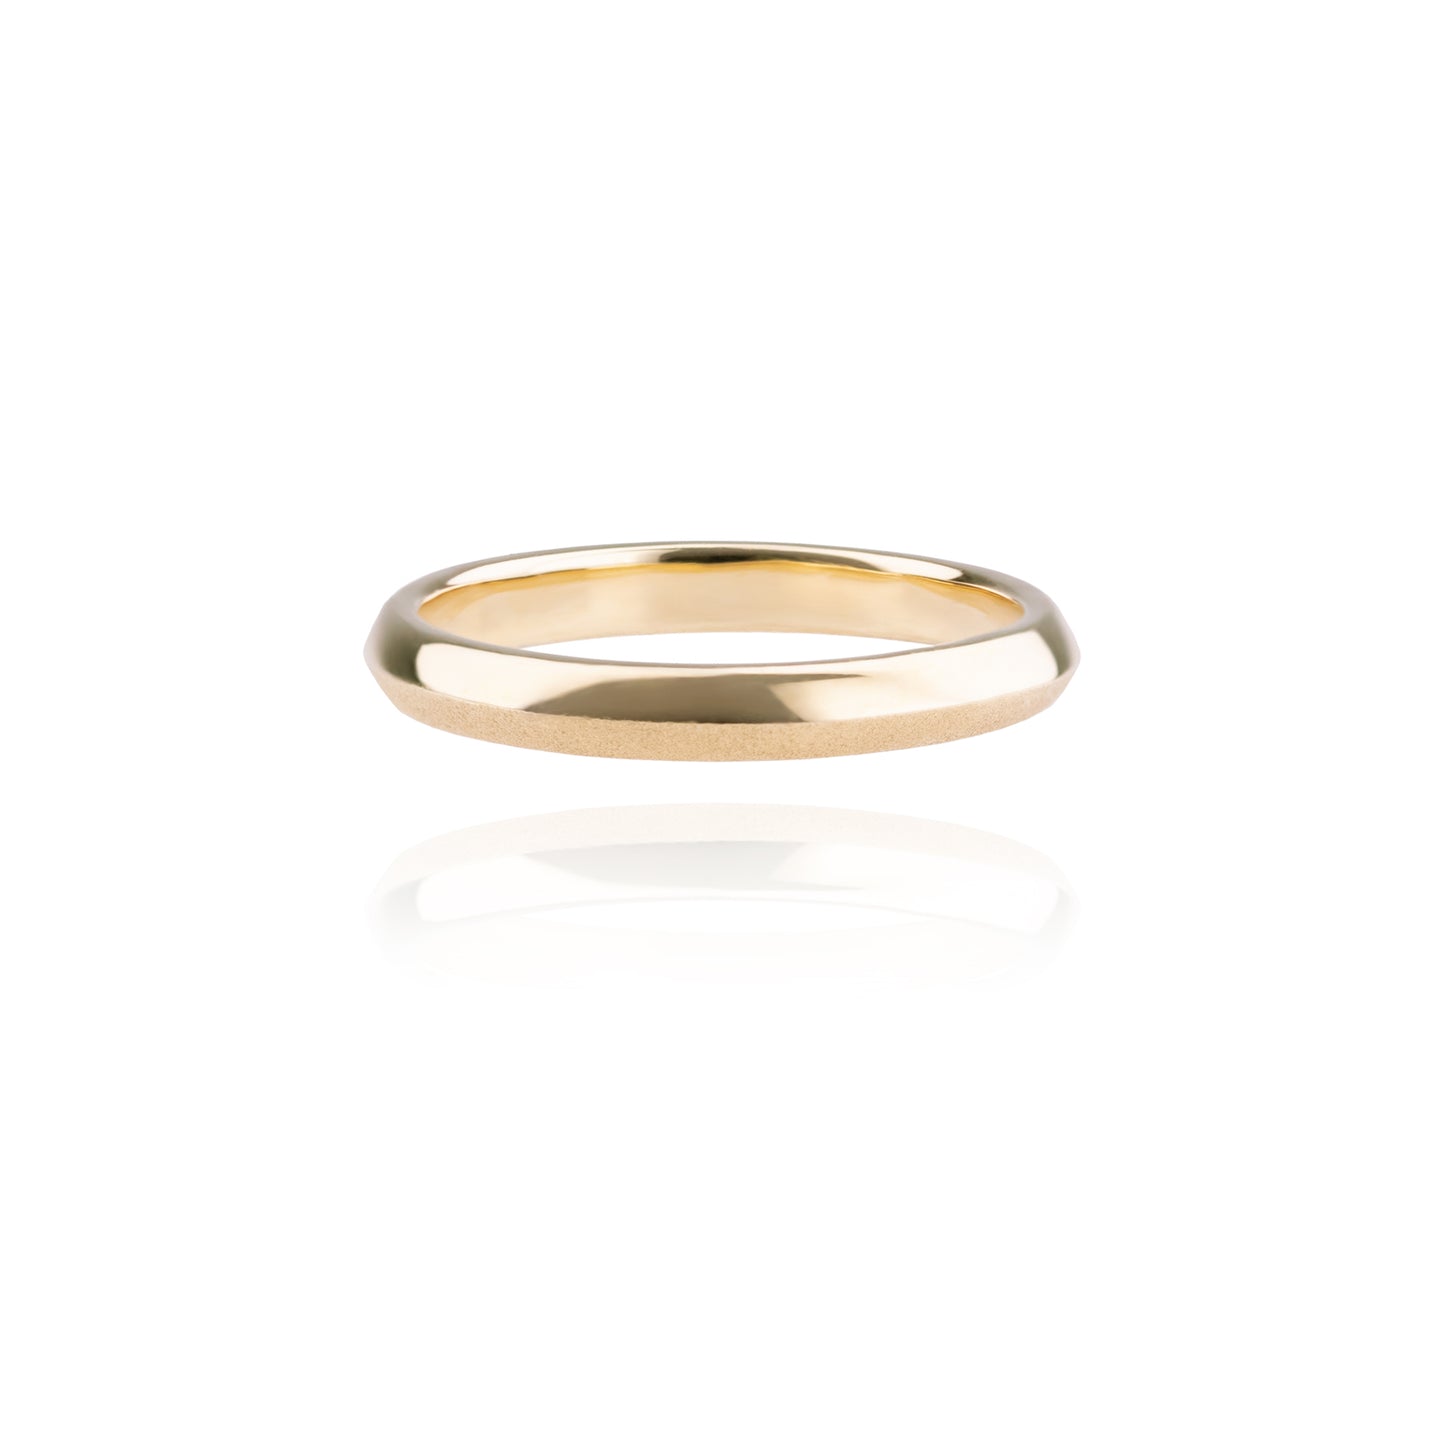 Orme-Brown Contemporary Jewellery Knife Edge 2.5mm Dune Band Wedding Ring 18ct Yellow Gold Recycled or Fairmined Eco Sustainable Ethical